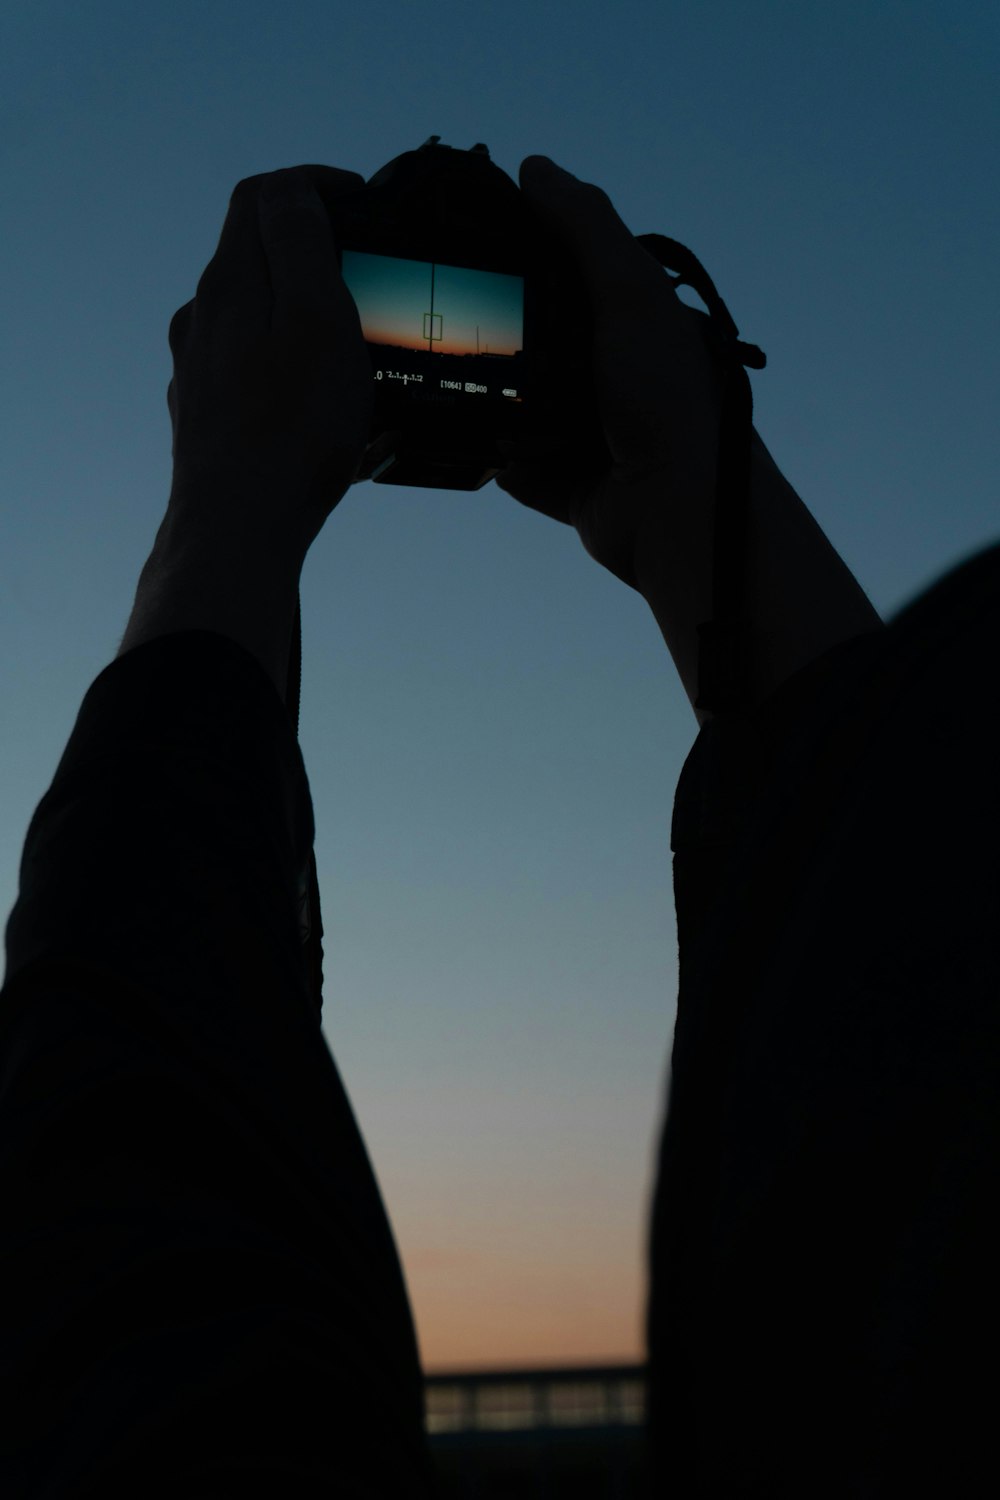 a person holding a camera up to take a picture